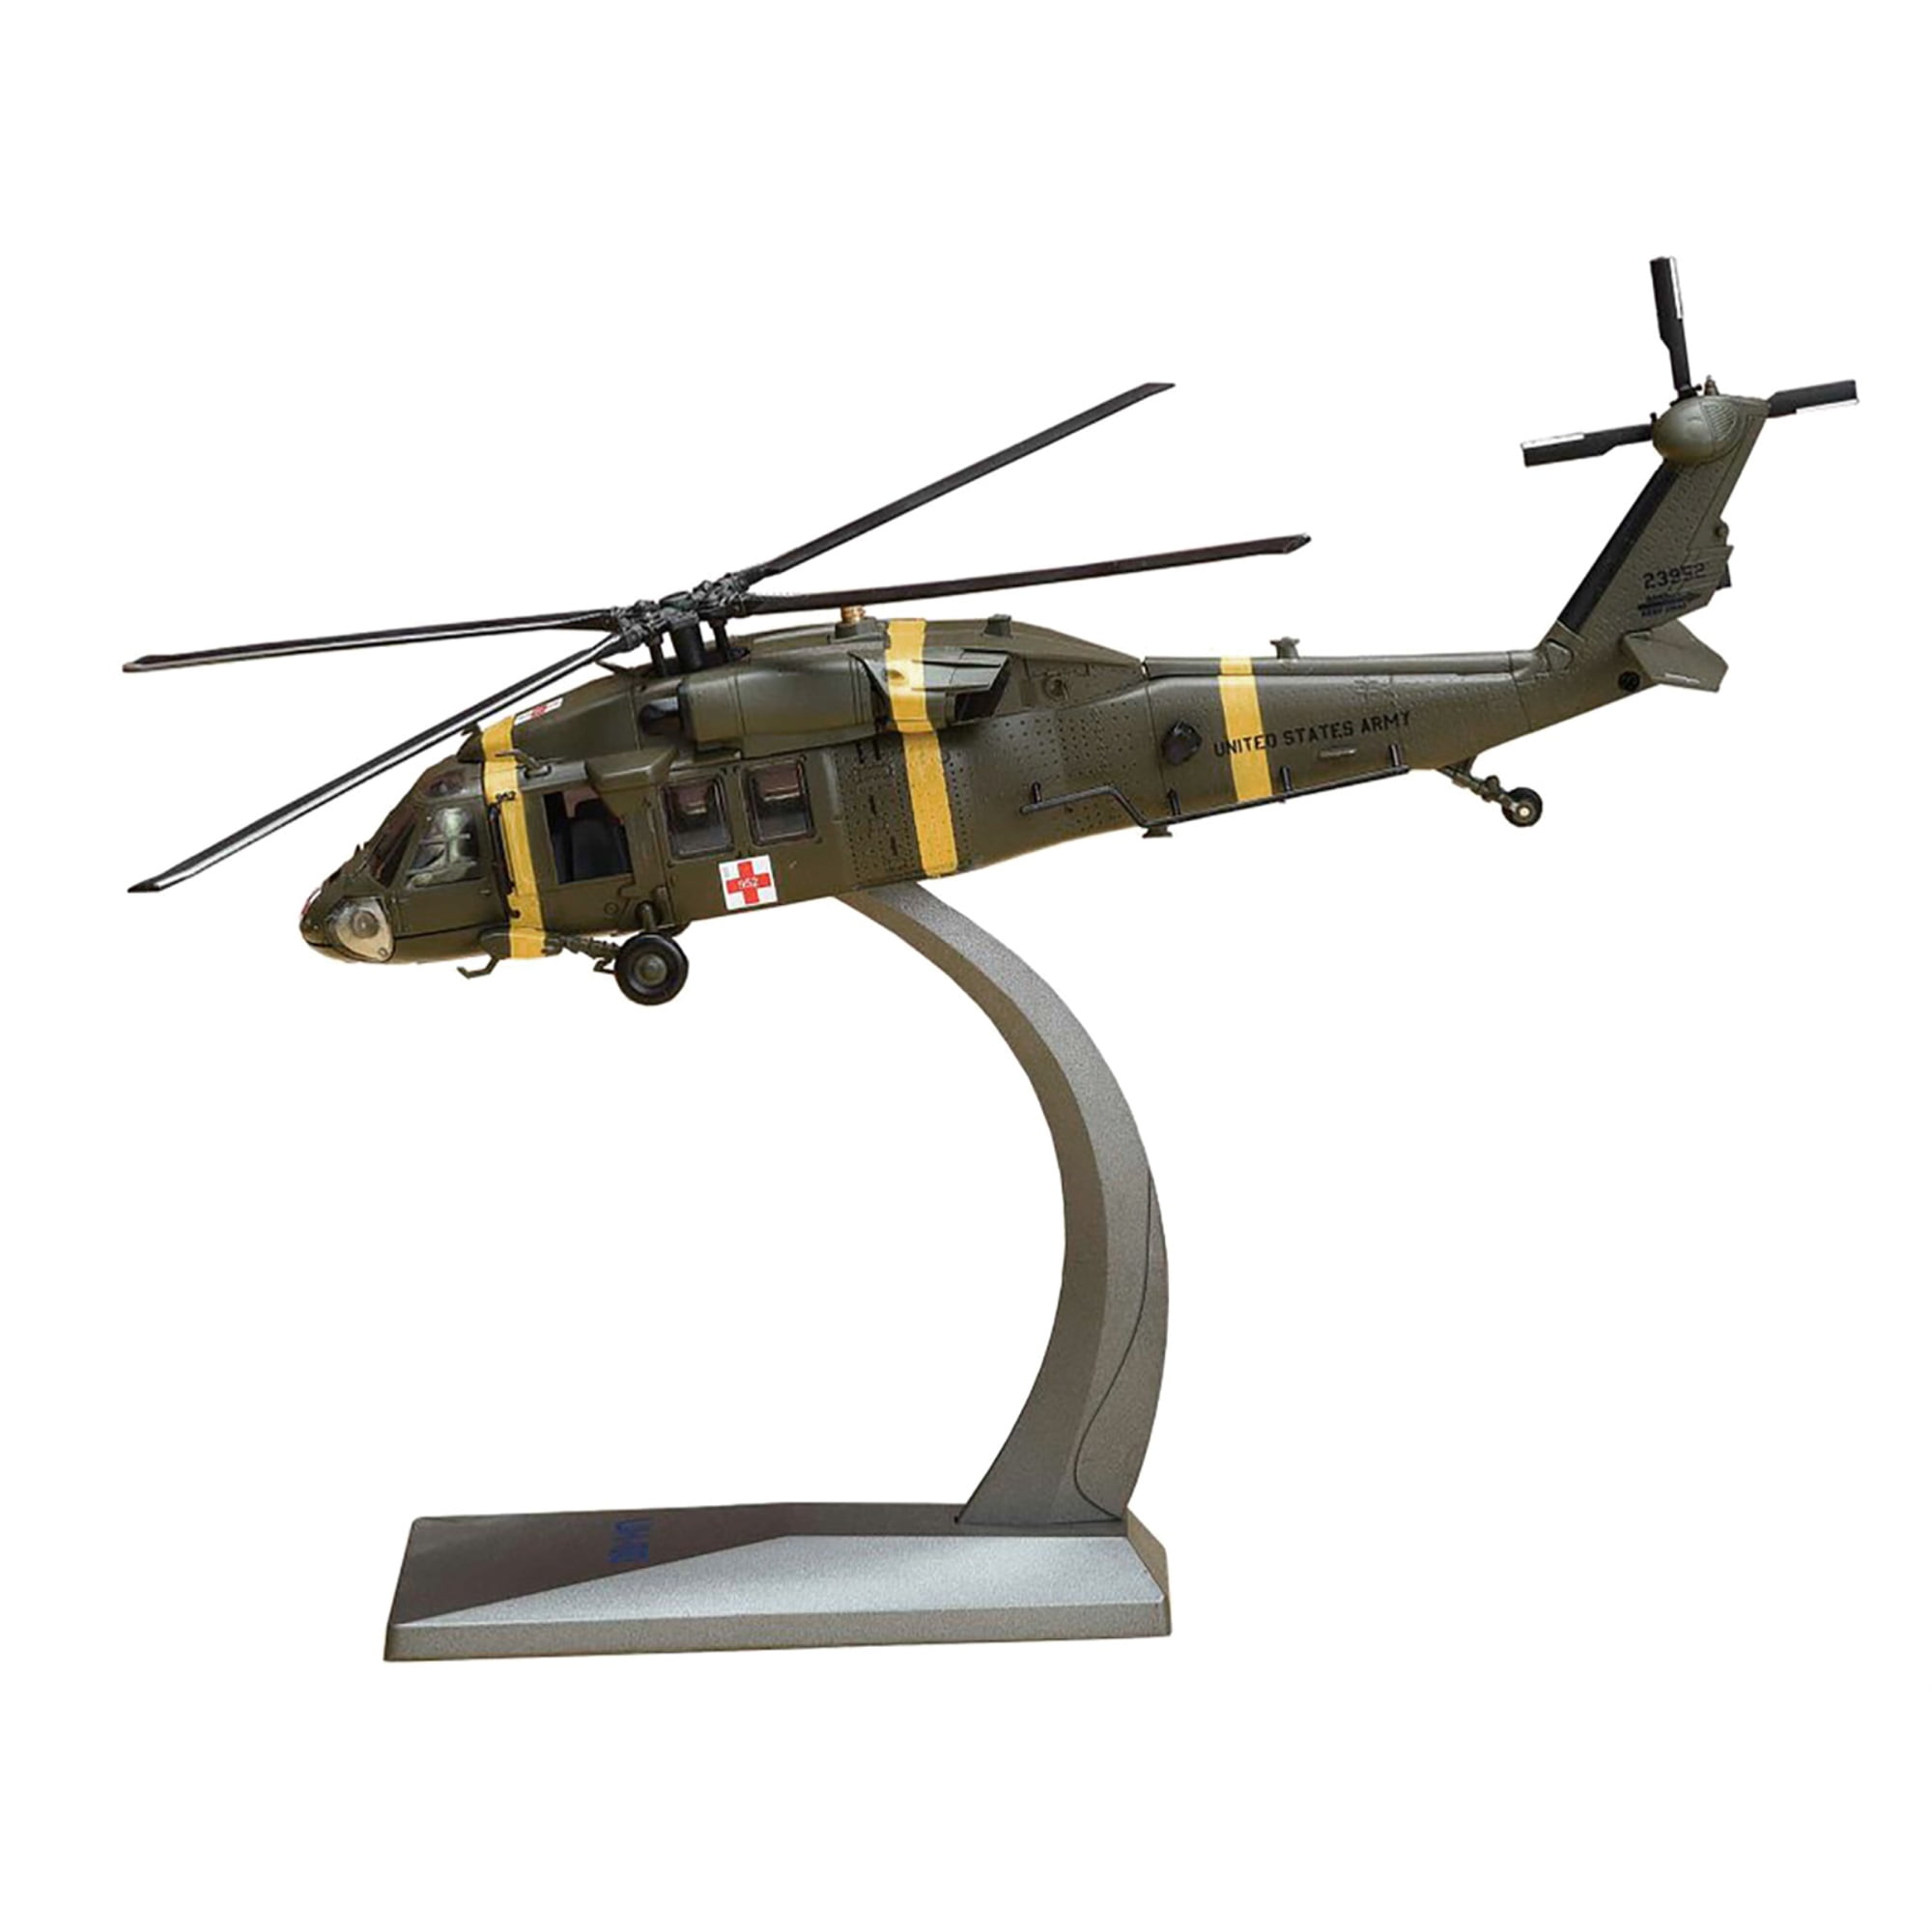 Picture of Air Force 1 AF1-0099B 1-72 Scale Sikorsky UH-60 Black Hawk 377th Medical Co Camp Humphreys South Korea United States Army 2007 Diecast Model Helicopter